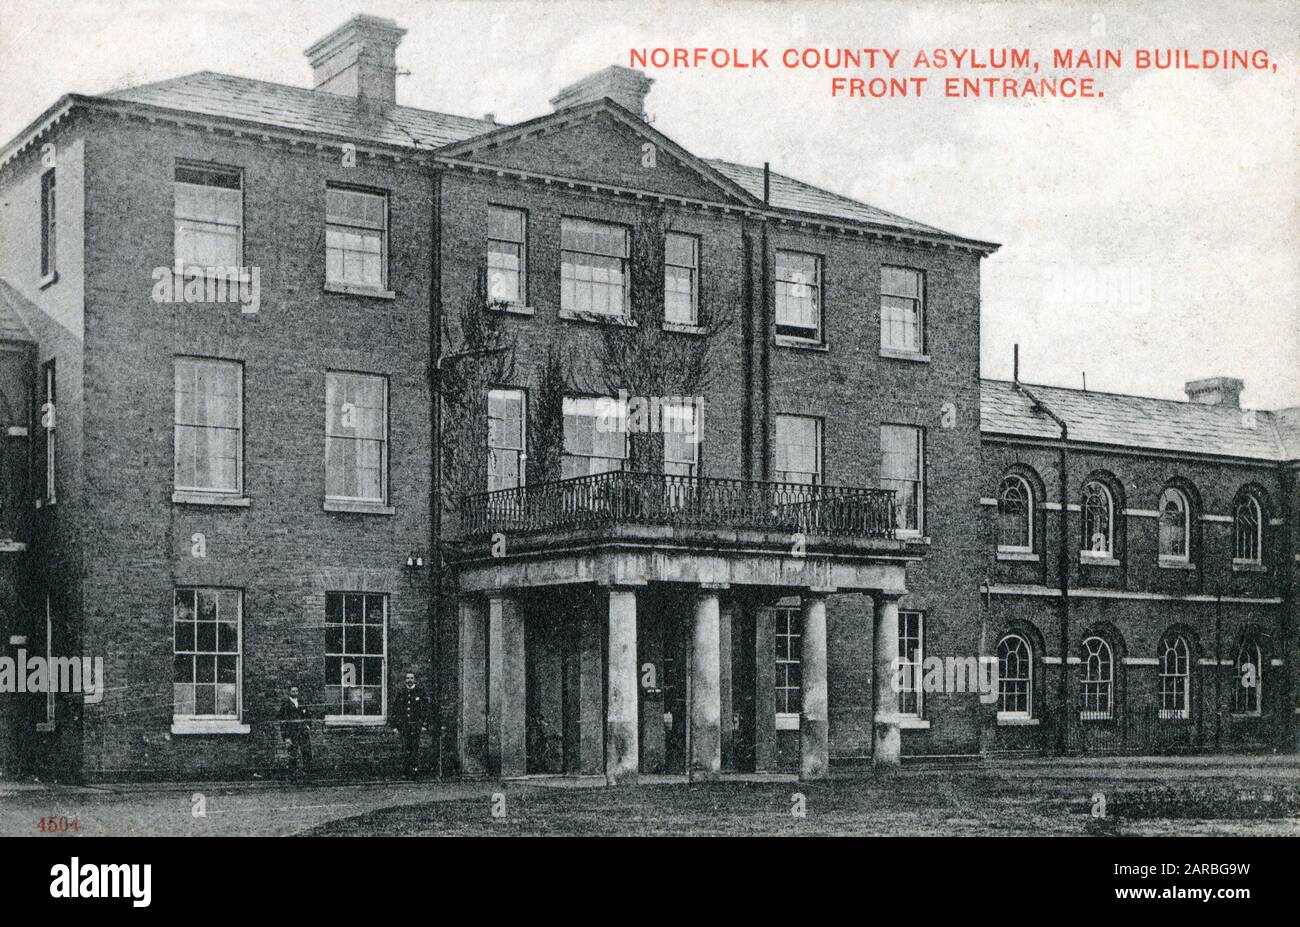 Norfolk County Asylum, Main Building - Front Entrance. The Norfolk County Lunatic Asylum was established in 1814 at Thorpe near Norwich. The site was later used as a military hospital during the First World War. It subsequently became known as Norfolk Mental Hospital and then St Andrew's Hospital.     Date: 1908 Stock Photo